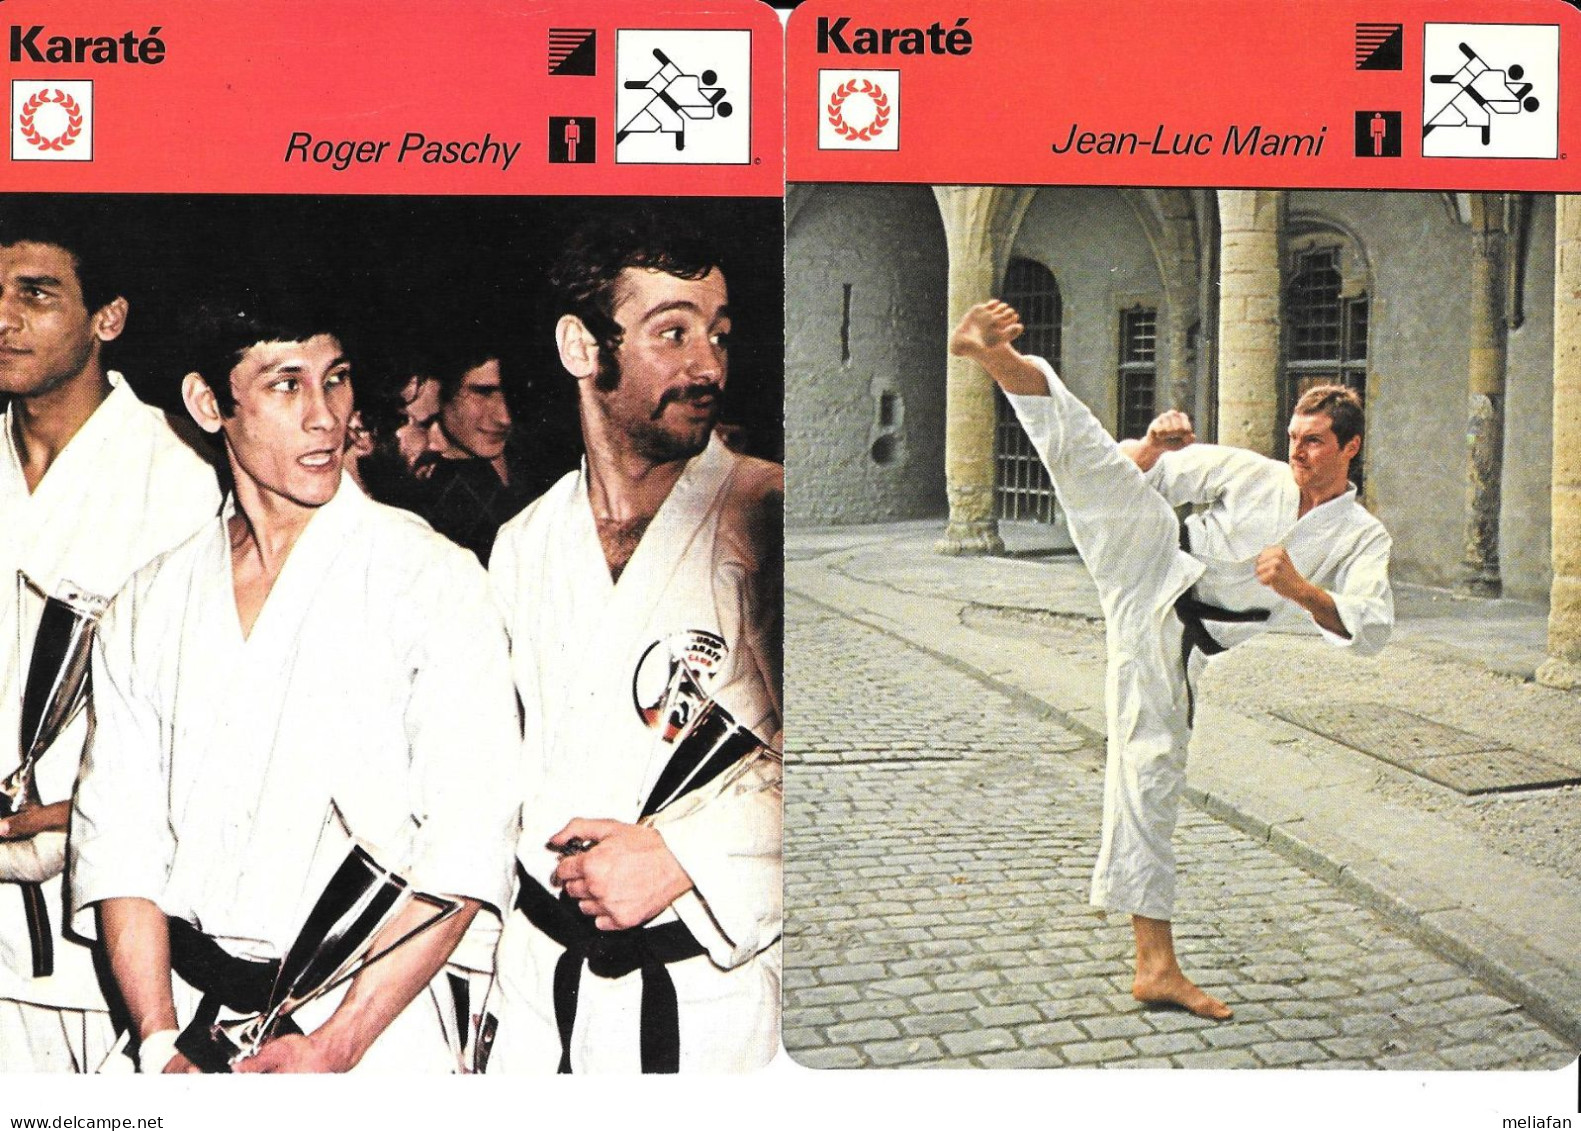 GF1785 - FICHES EDITION RENCONTRE - KARATE - GILBERT GRUSS - GUY SAUVIN - ROGER PASCHY - JEAN LUC MAMI - Martial Arts